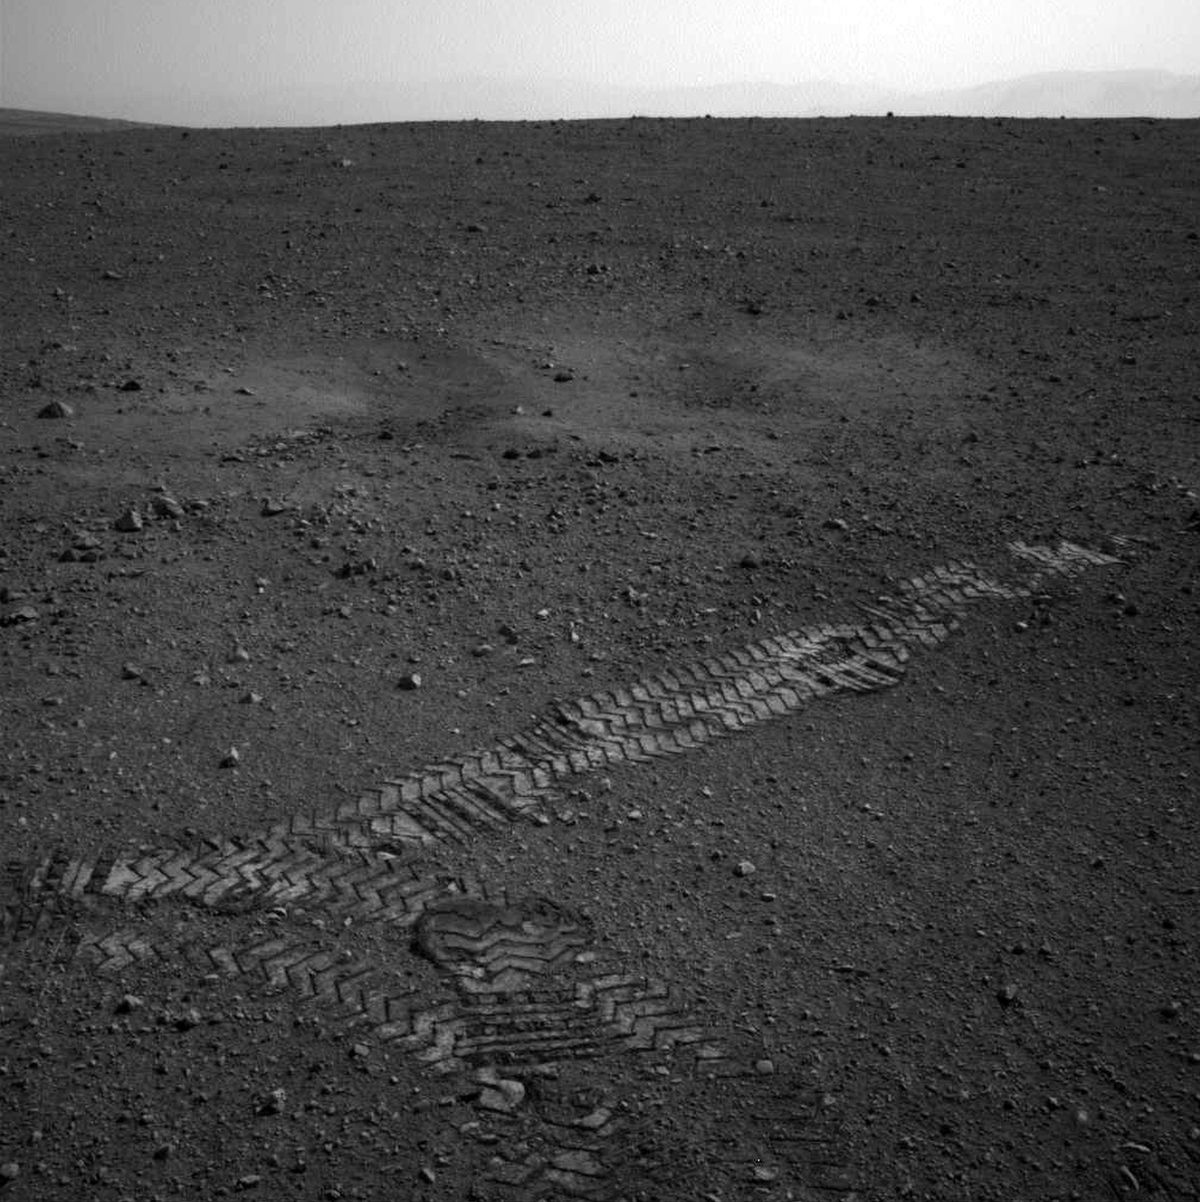 This image taken Wednesday and provided by NASA shows the Curiosity rover’s wheel tracks on the surface of Mars. (Associated Press)